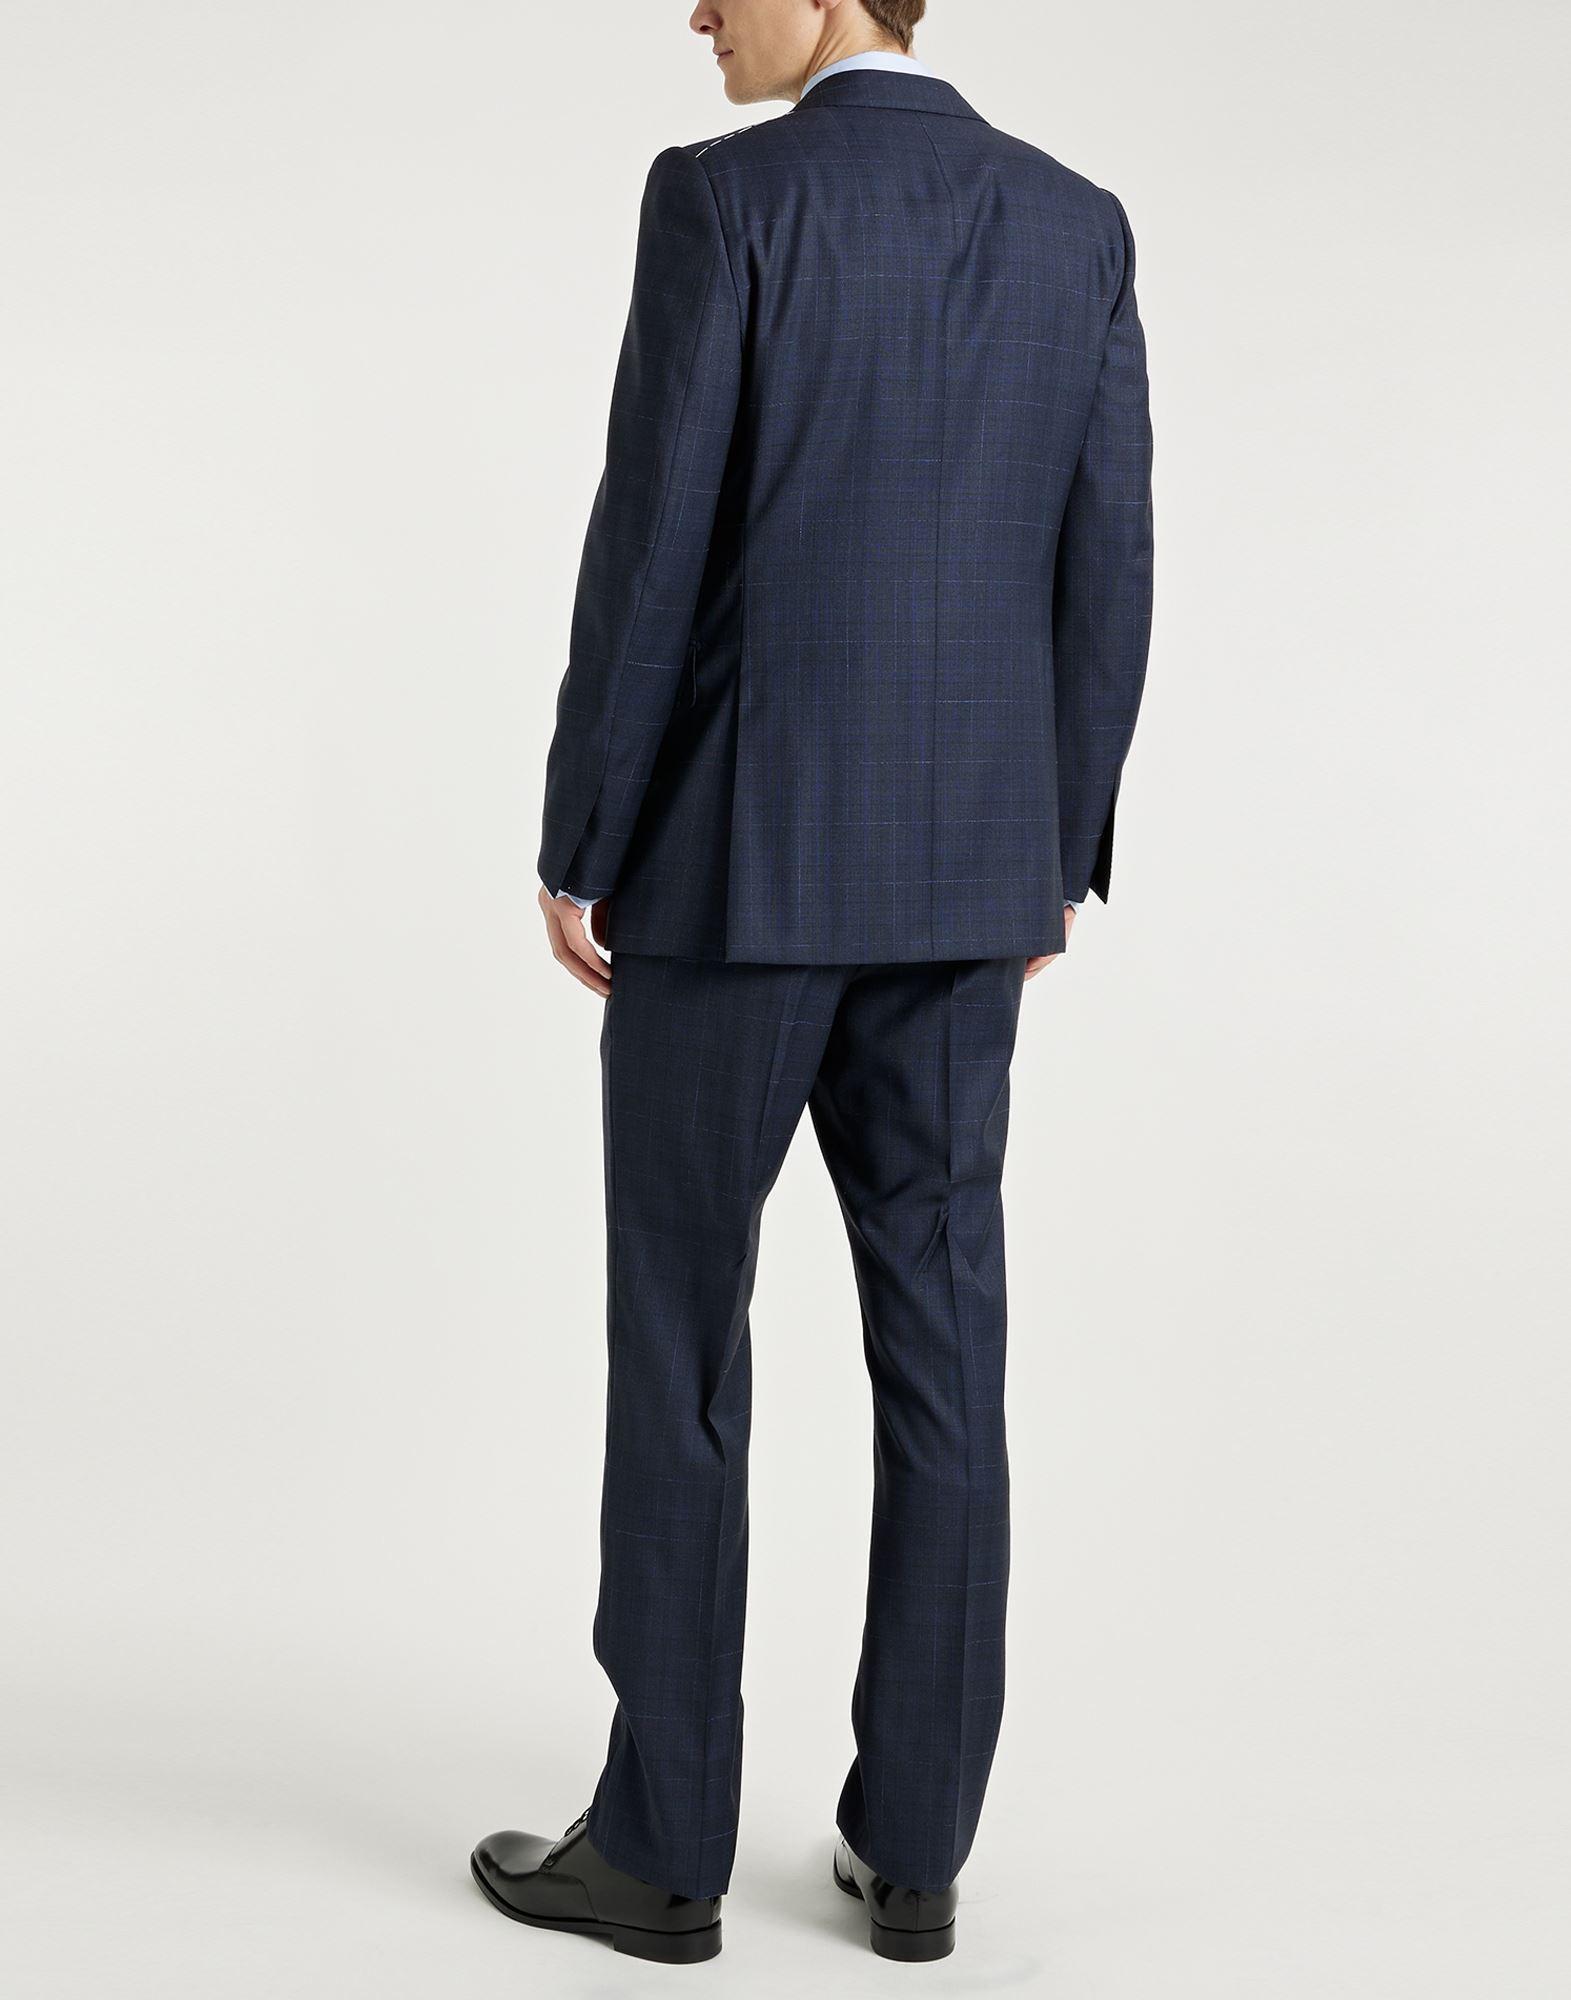 Dunhill Suit | rededuct.com